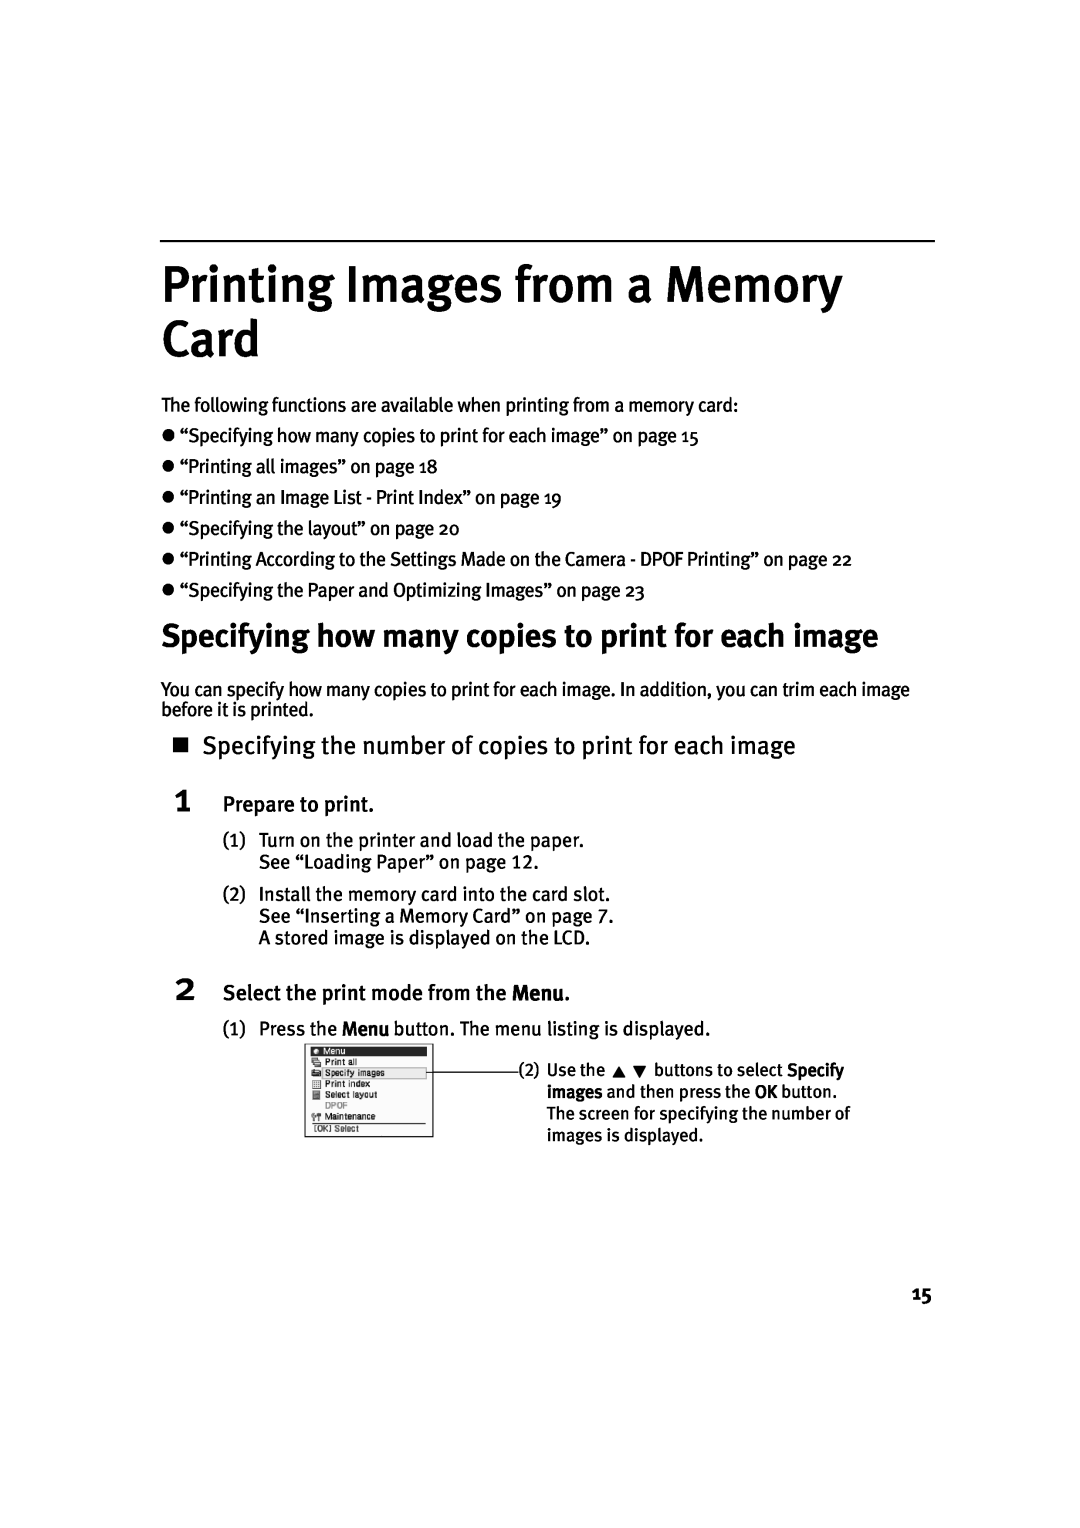 Canon 900D manual Printing Images from a Memory Card, Specifying how many copies to print for each image, Prepare to print 